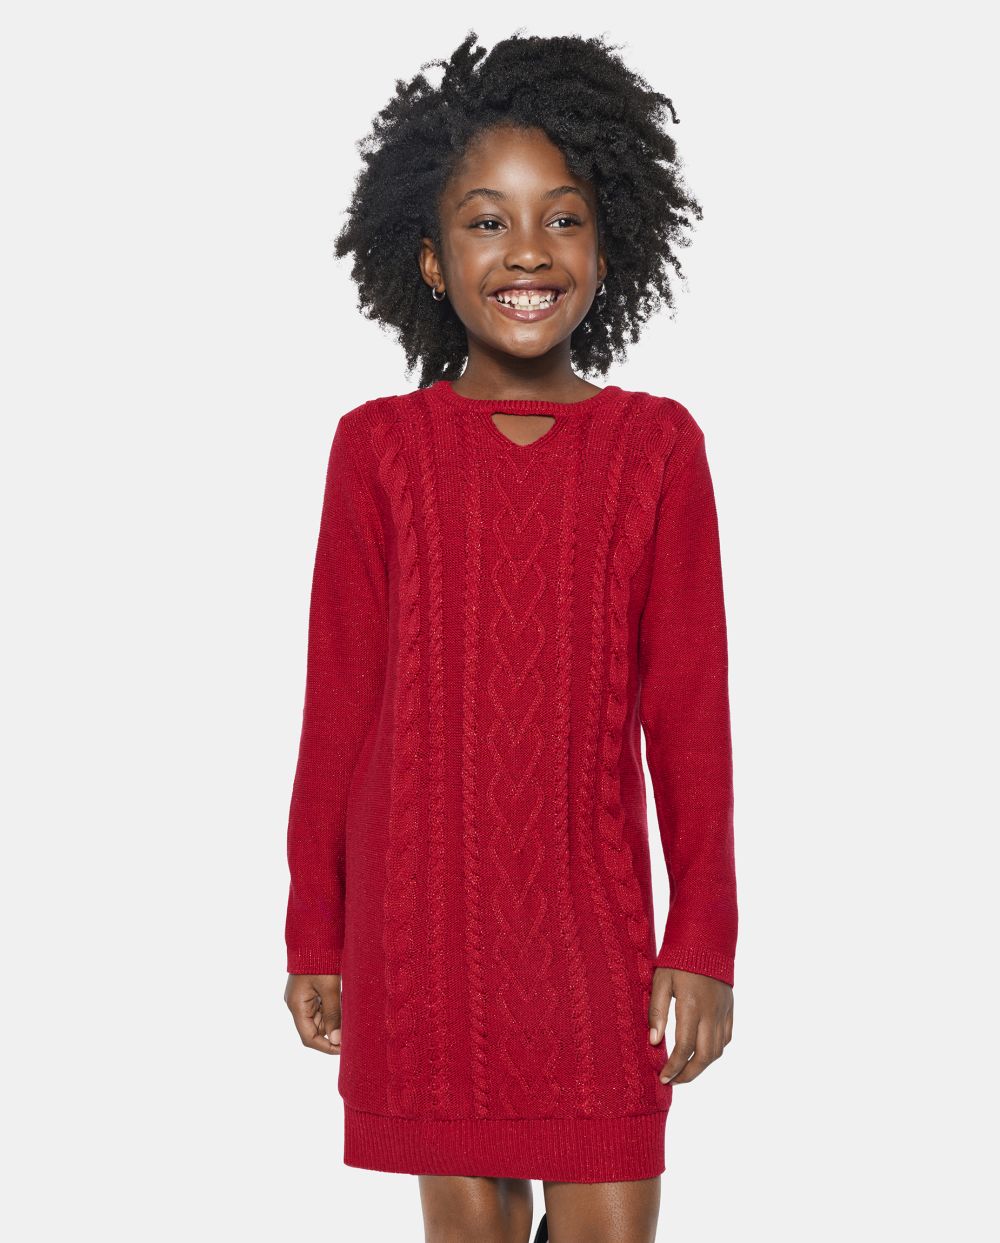 Girls Long Sleeves Above the Knee Sweater Crew Neck Cutout Dress